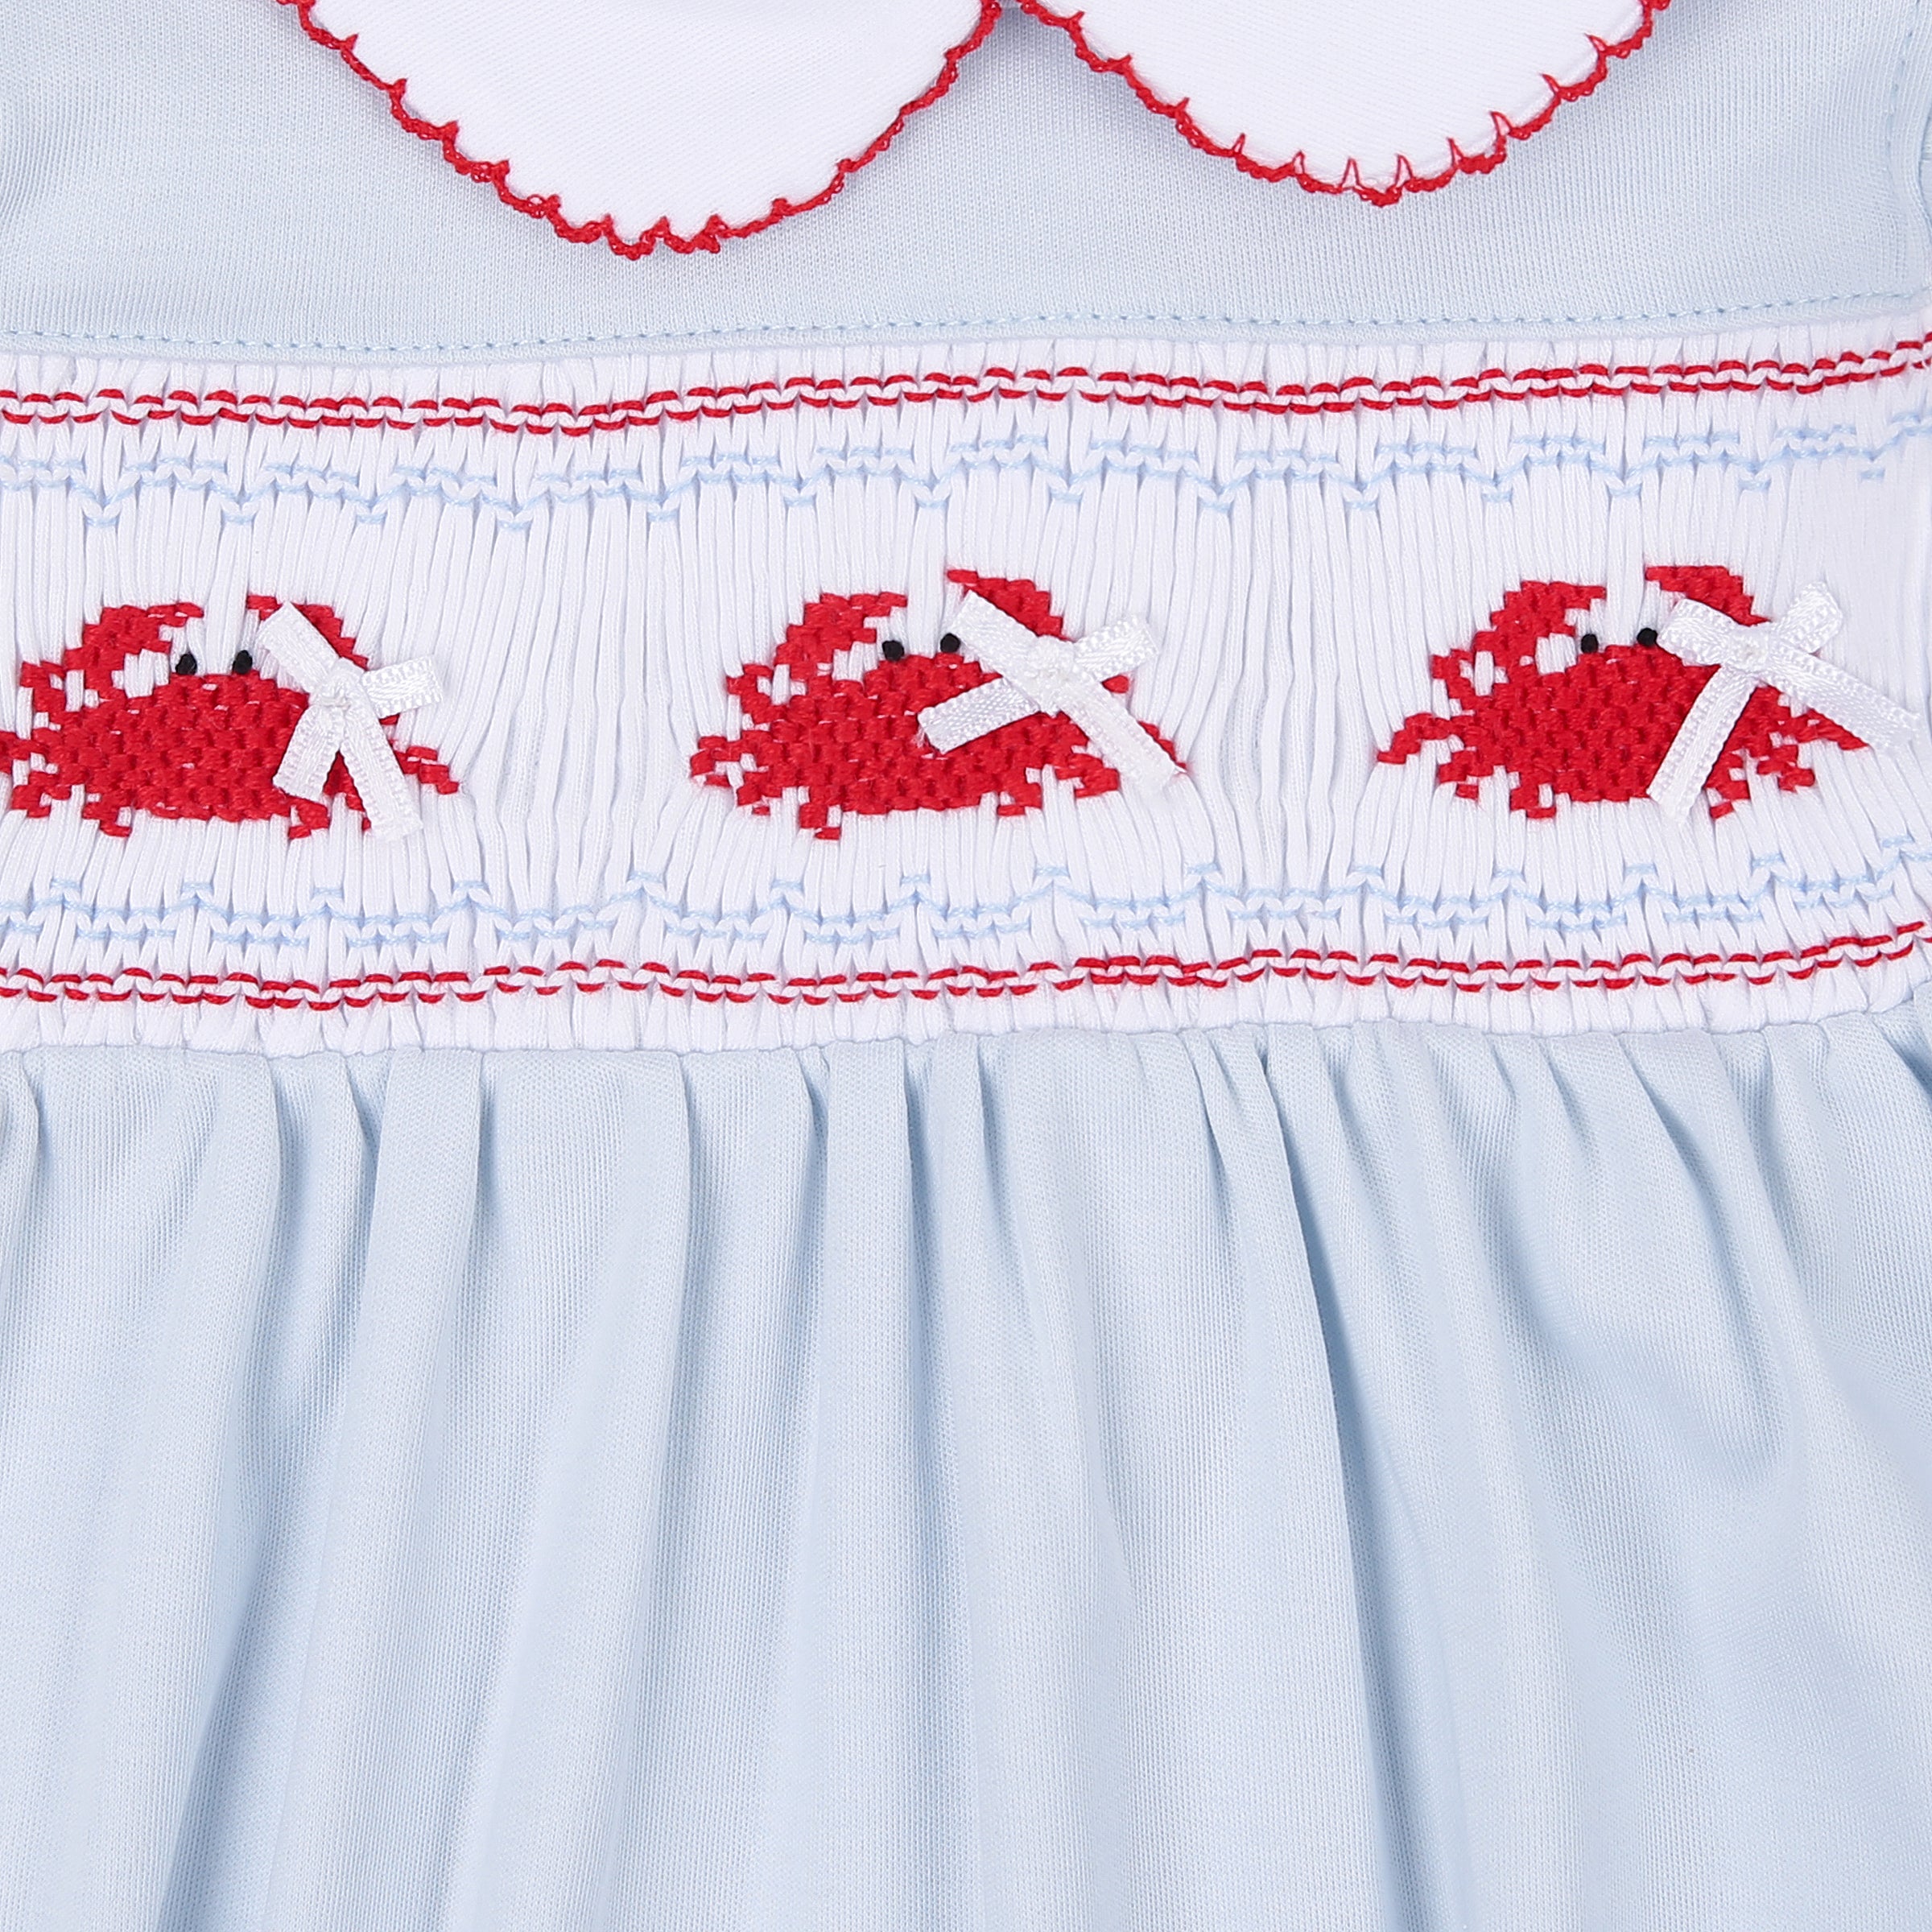 Crab Classics Smocked Collared Toddler Dress